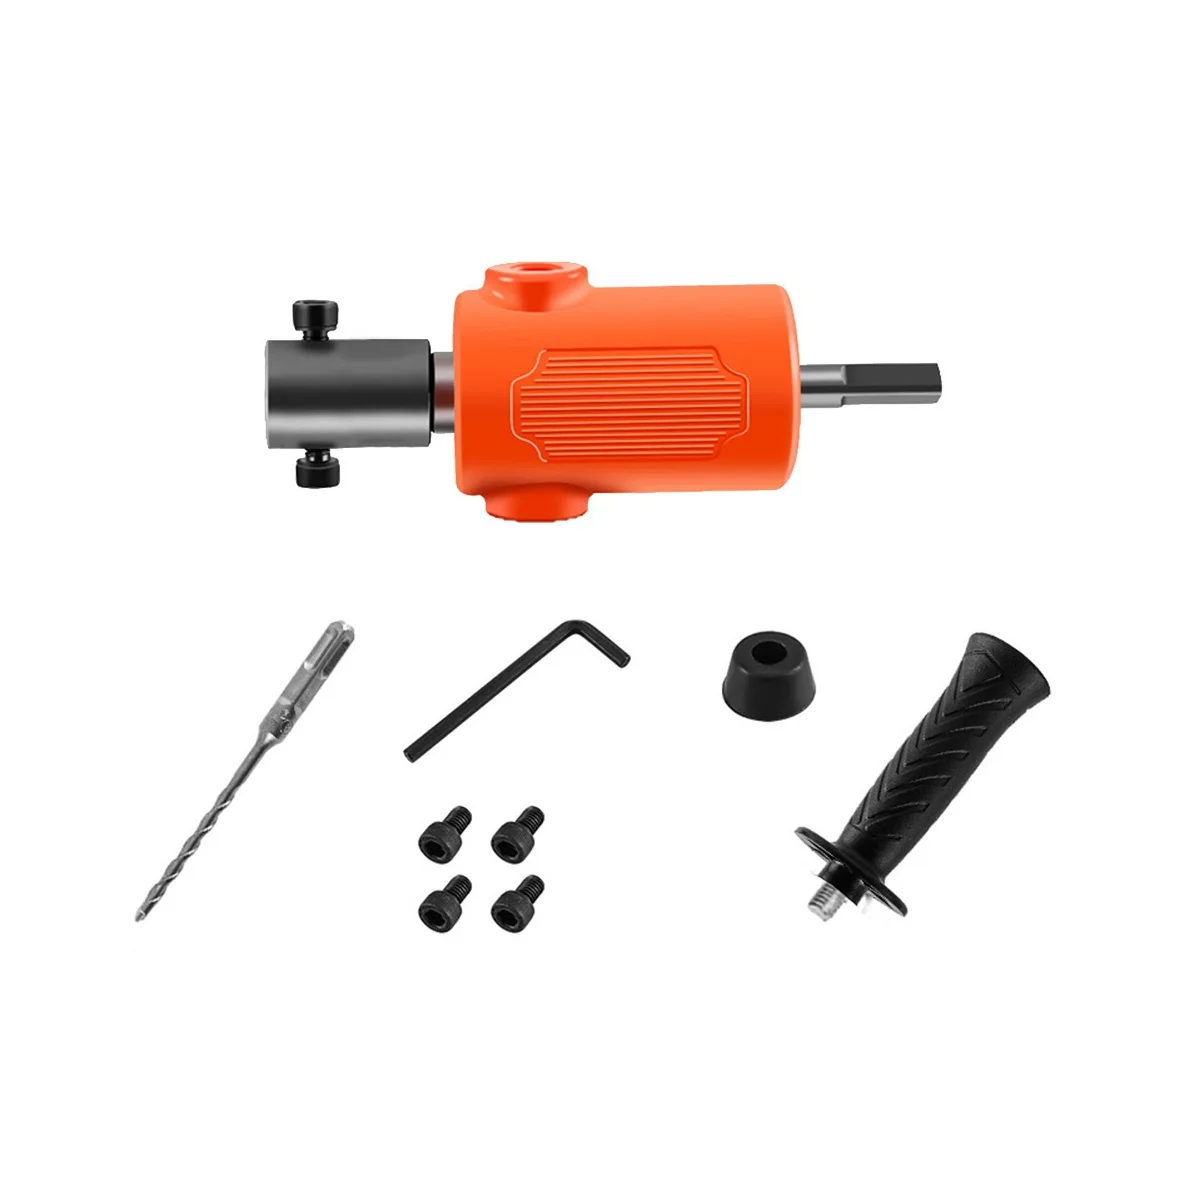 

Electric Drill to Electric Hammer Conversion Set High Strength Portable Electric Drill Adapter for Workshop